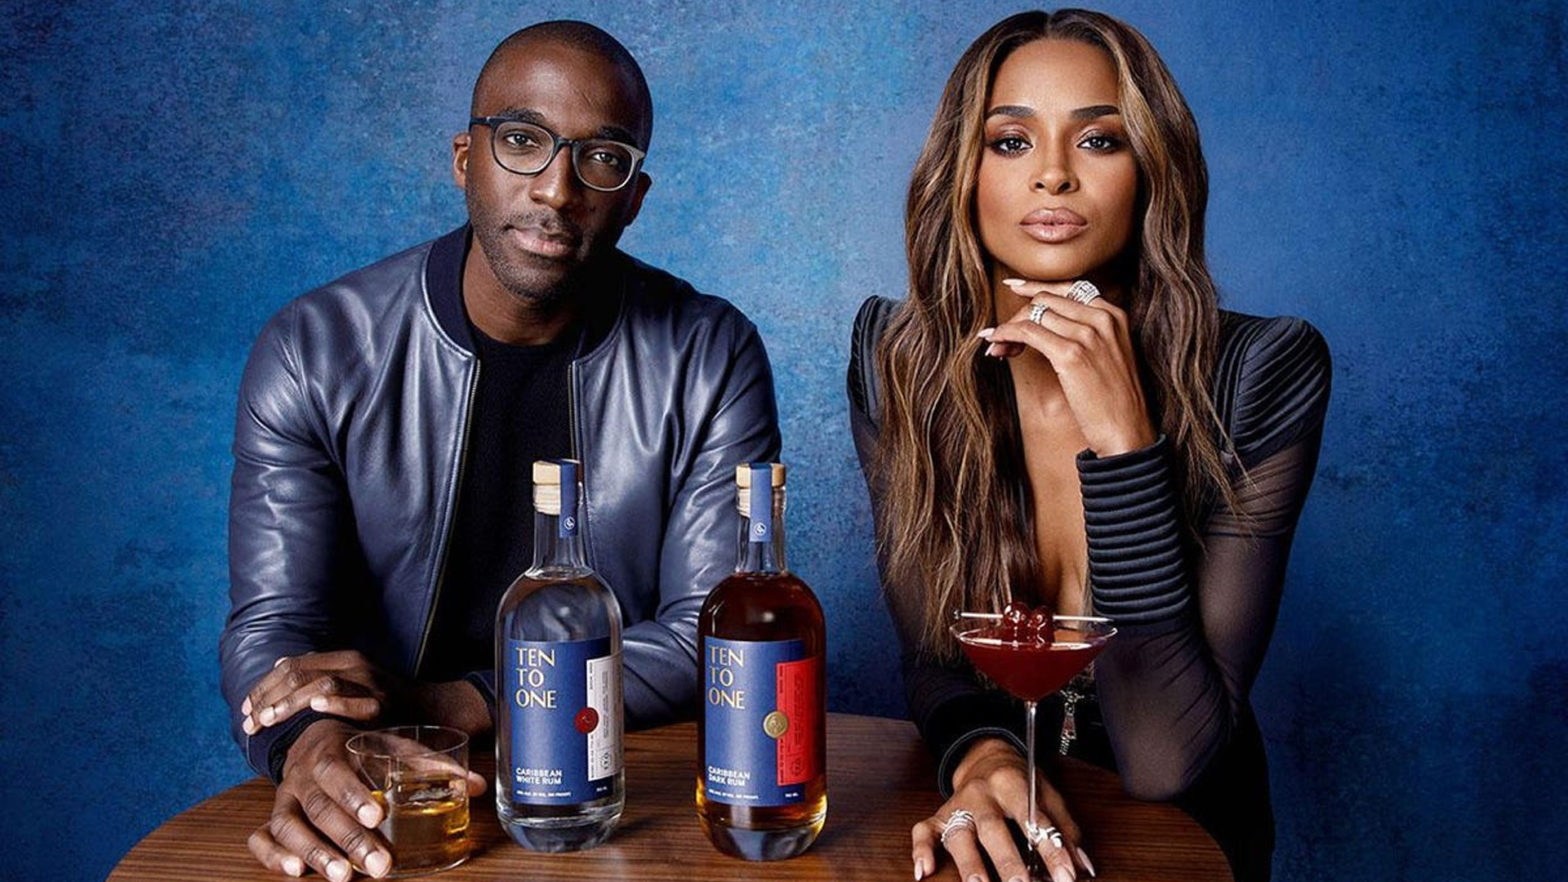 Ciara's Ten To One Rum Receives $1M Investment From Private Equity Firm InvestBev Group